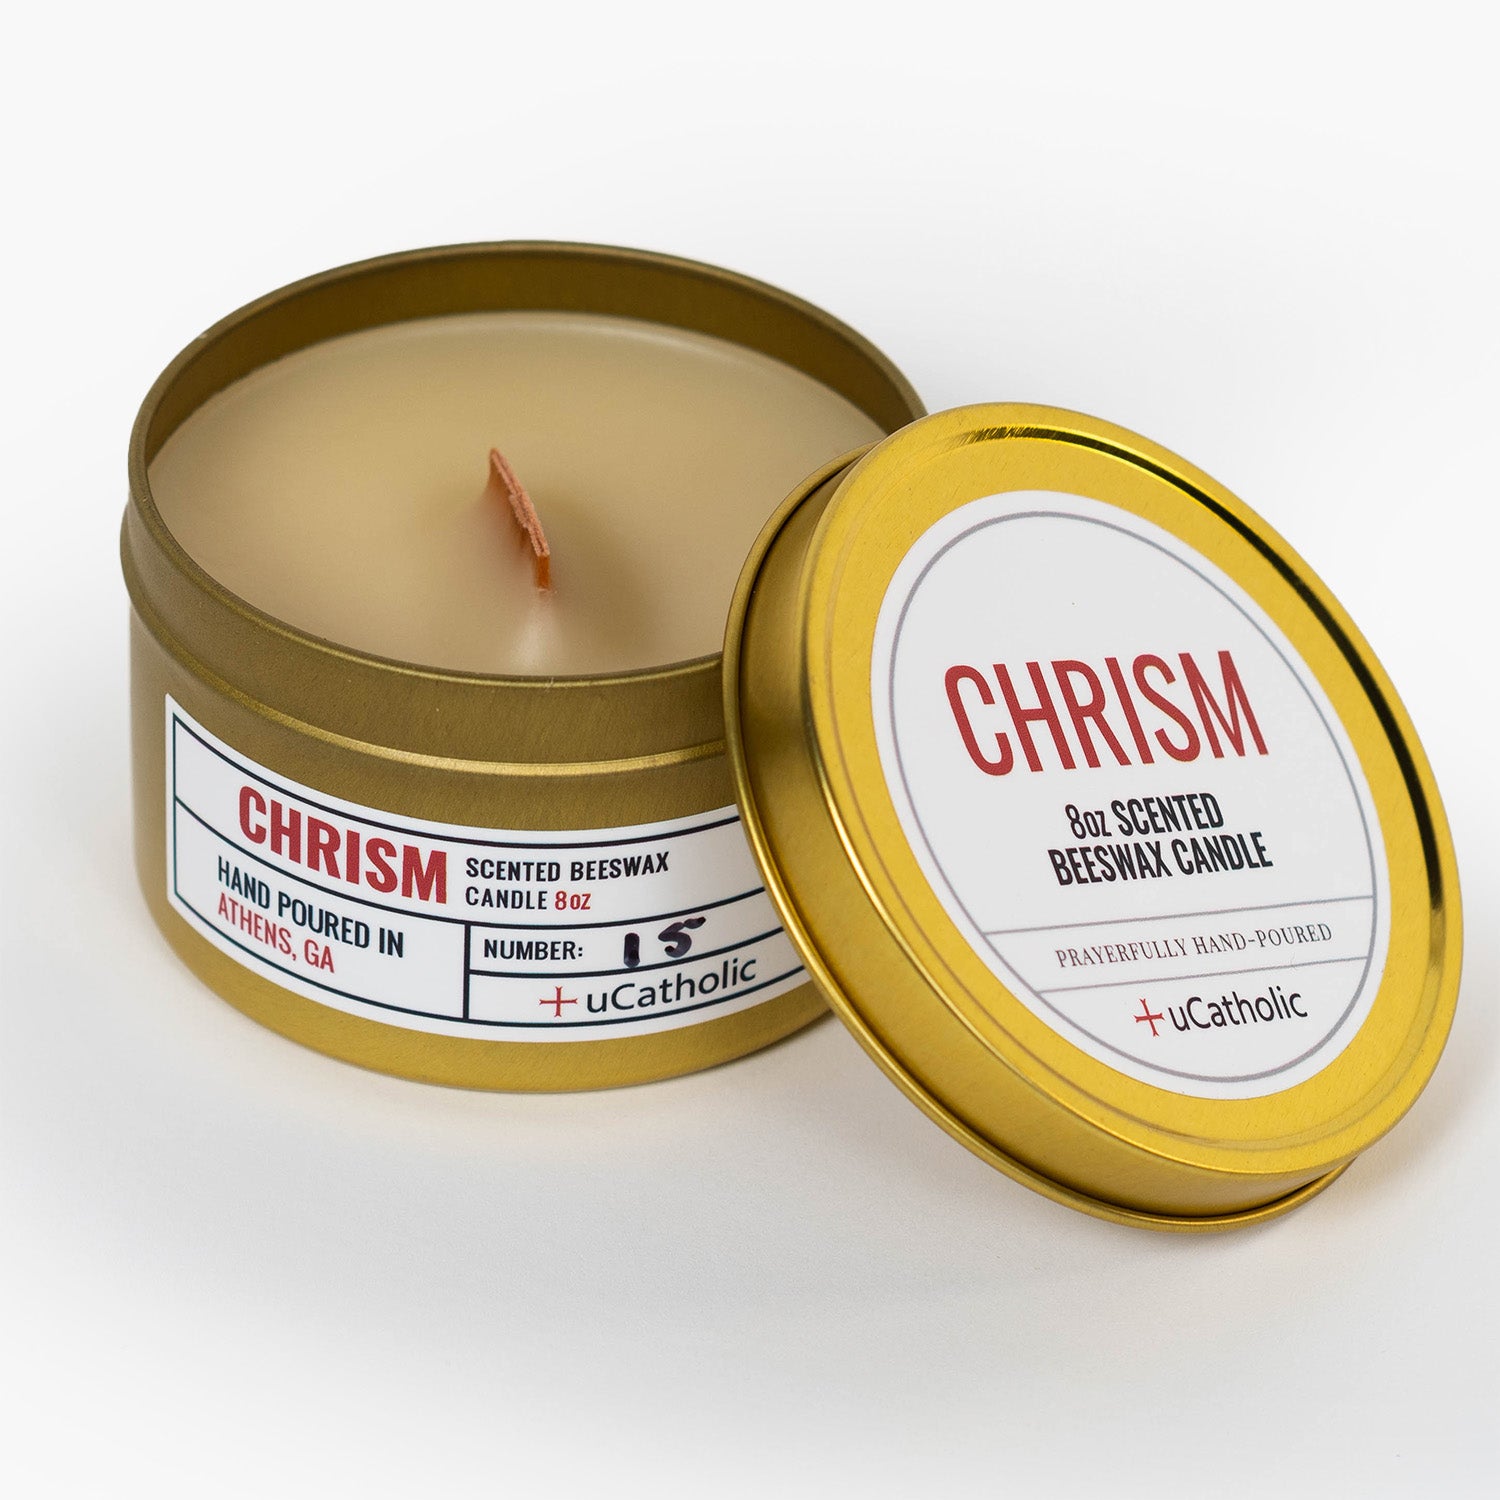 Chrism Beeswax Candle